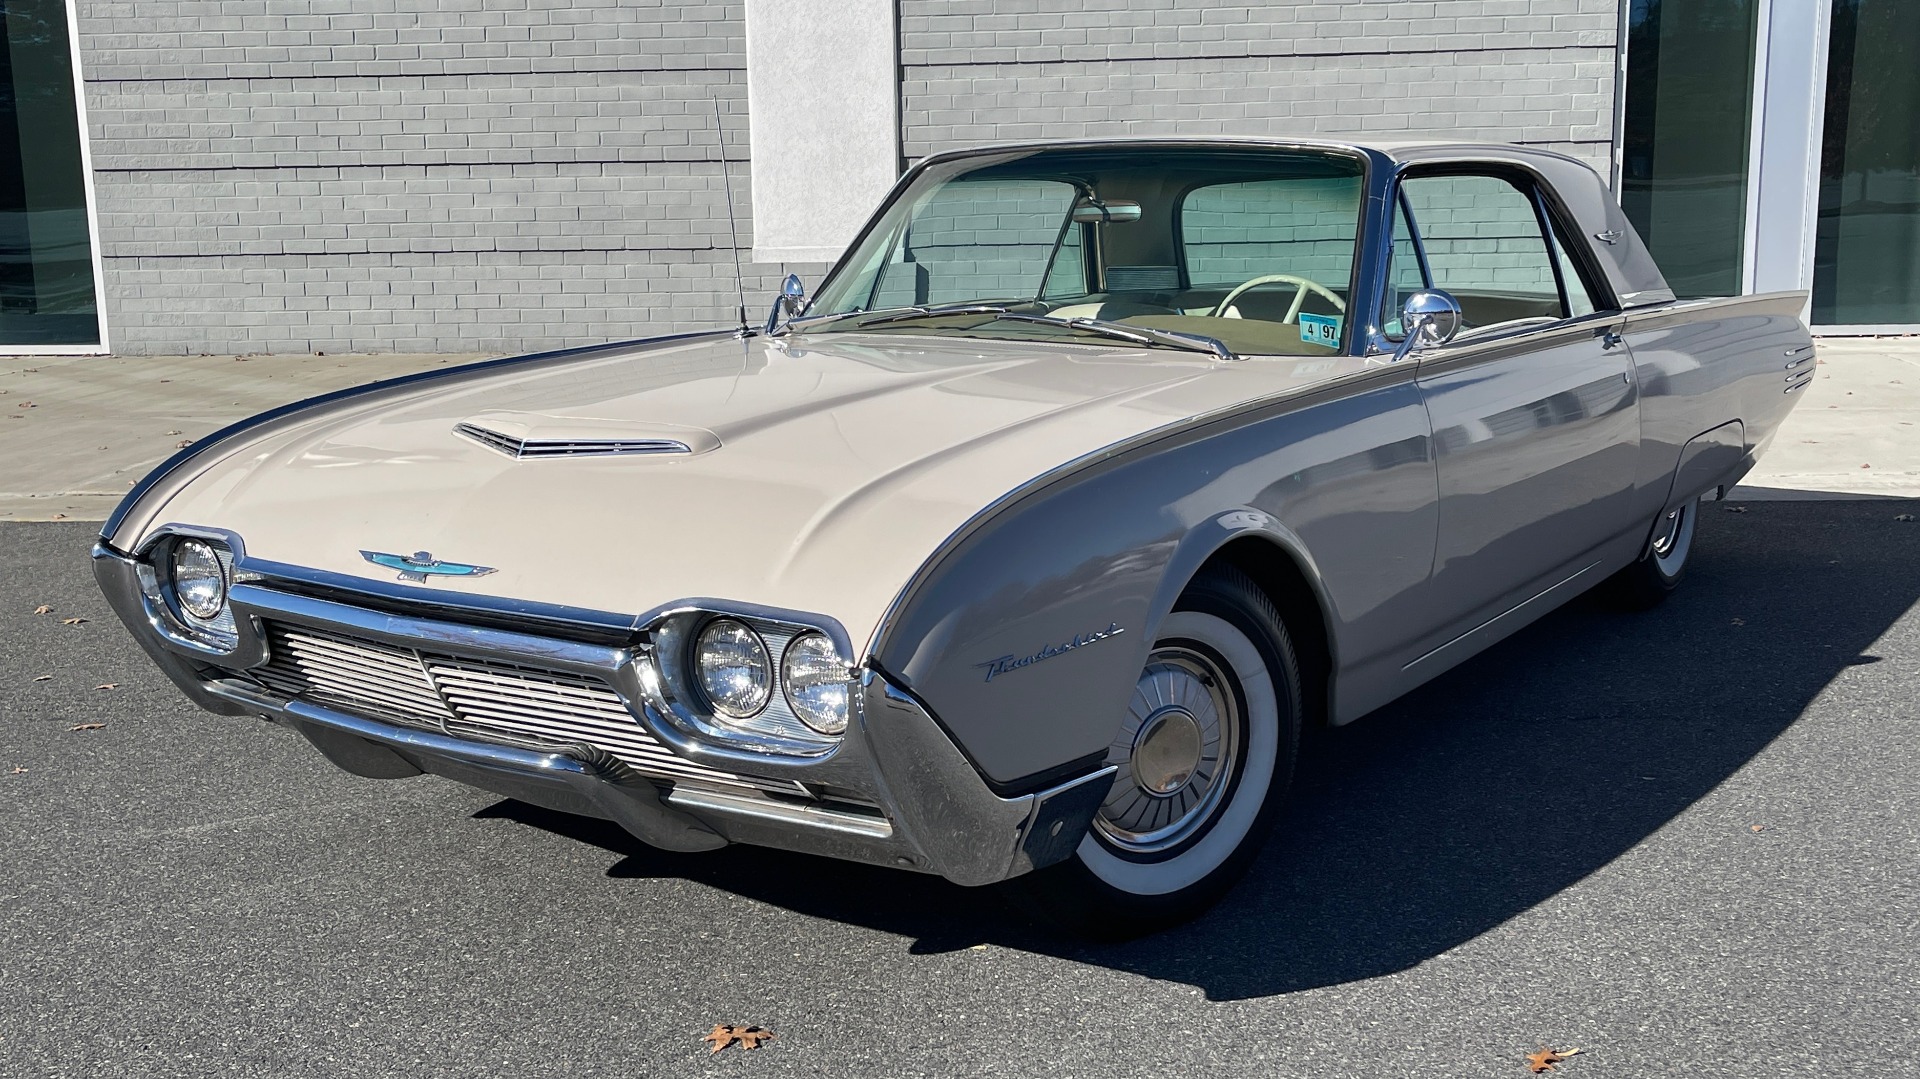 Used 1961 Ford THUNDERBIRD HARDTOP / 390CI V8 / AUTO TRANS / LOW MILEAGE SURVIVOR for sale $19,995 at Formula Imports in Charlotte NC 28227 3